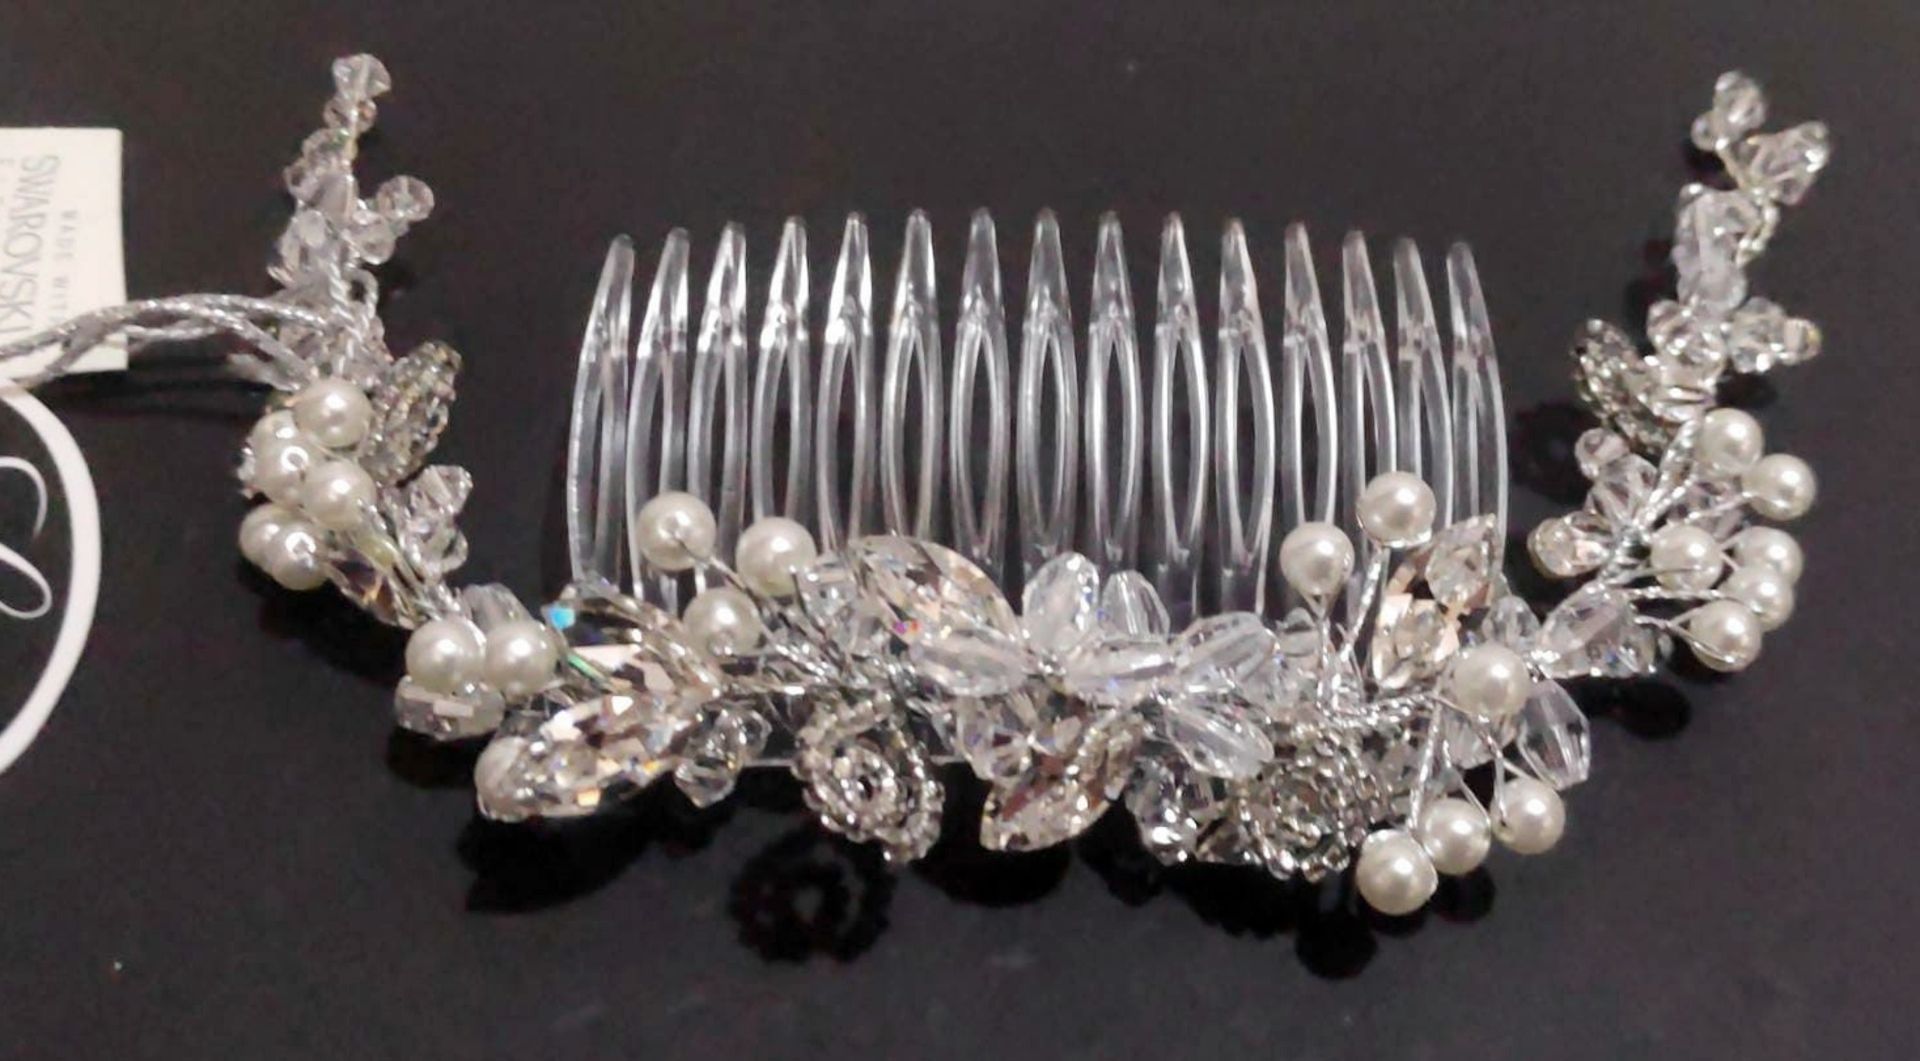 Lot of 5 x Silver Bridal Hair Fascinator Accessories by Richard Designs - HON176 - CL733 - Image 2 of 7